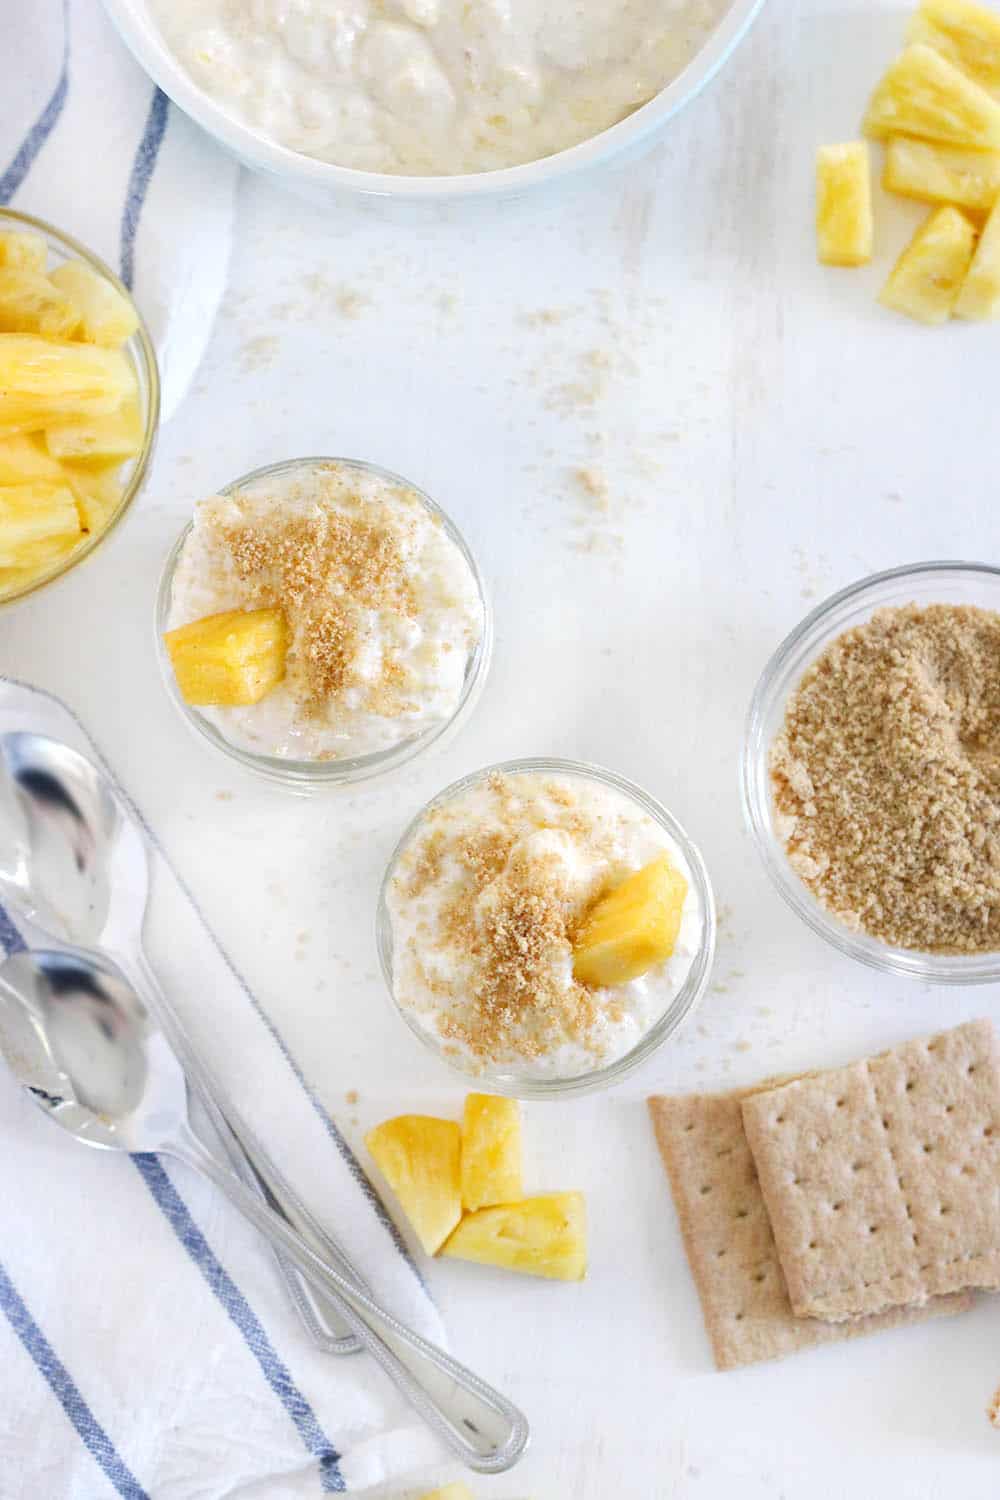 This No-Bake Pineapple Cheesecake Whip recipe uses only 4 ingredients, takes 10 minutes, and has no refined sugar! Made with fresh pineapple and 100% real food ingredients.